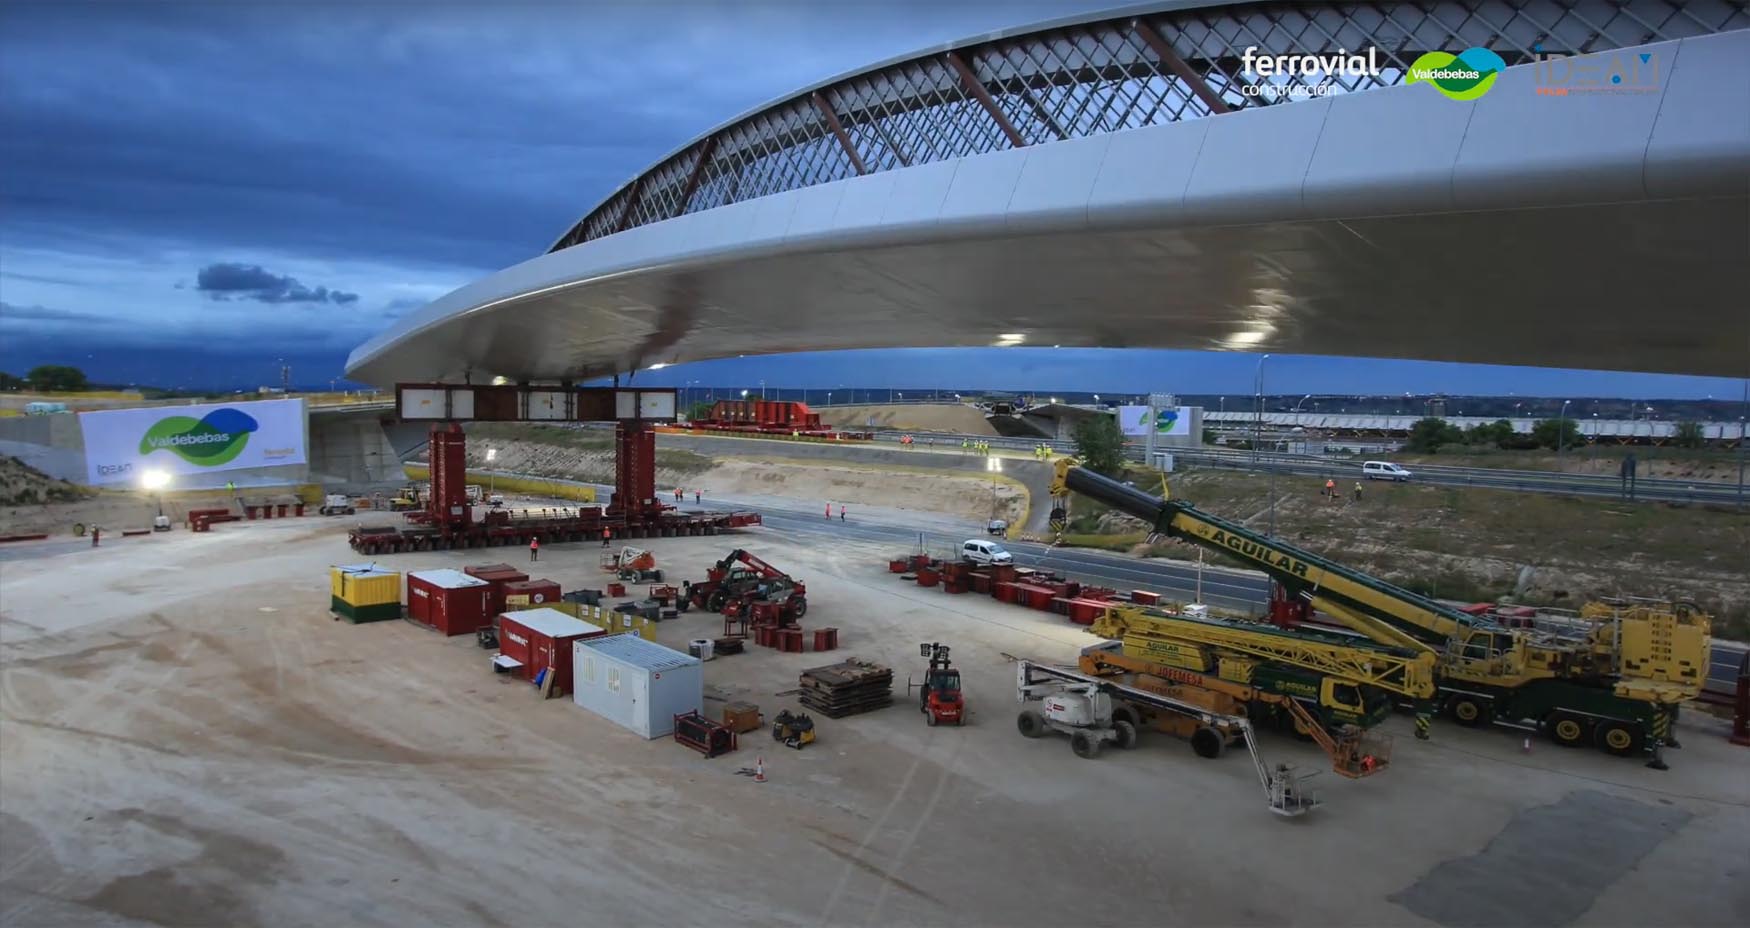 A unique 128.6m-long steel arch is transported near Madrid Airport image